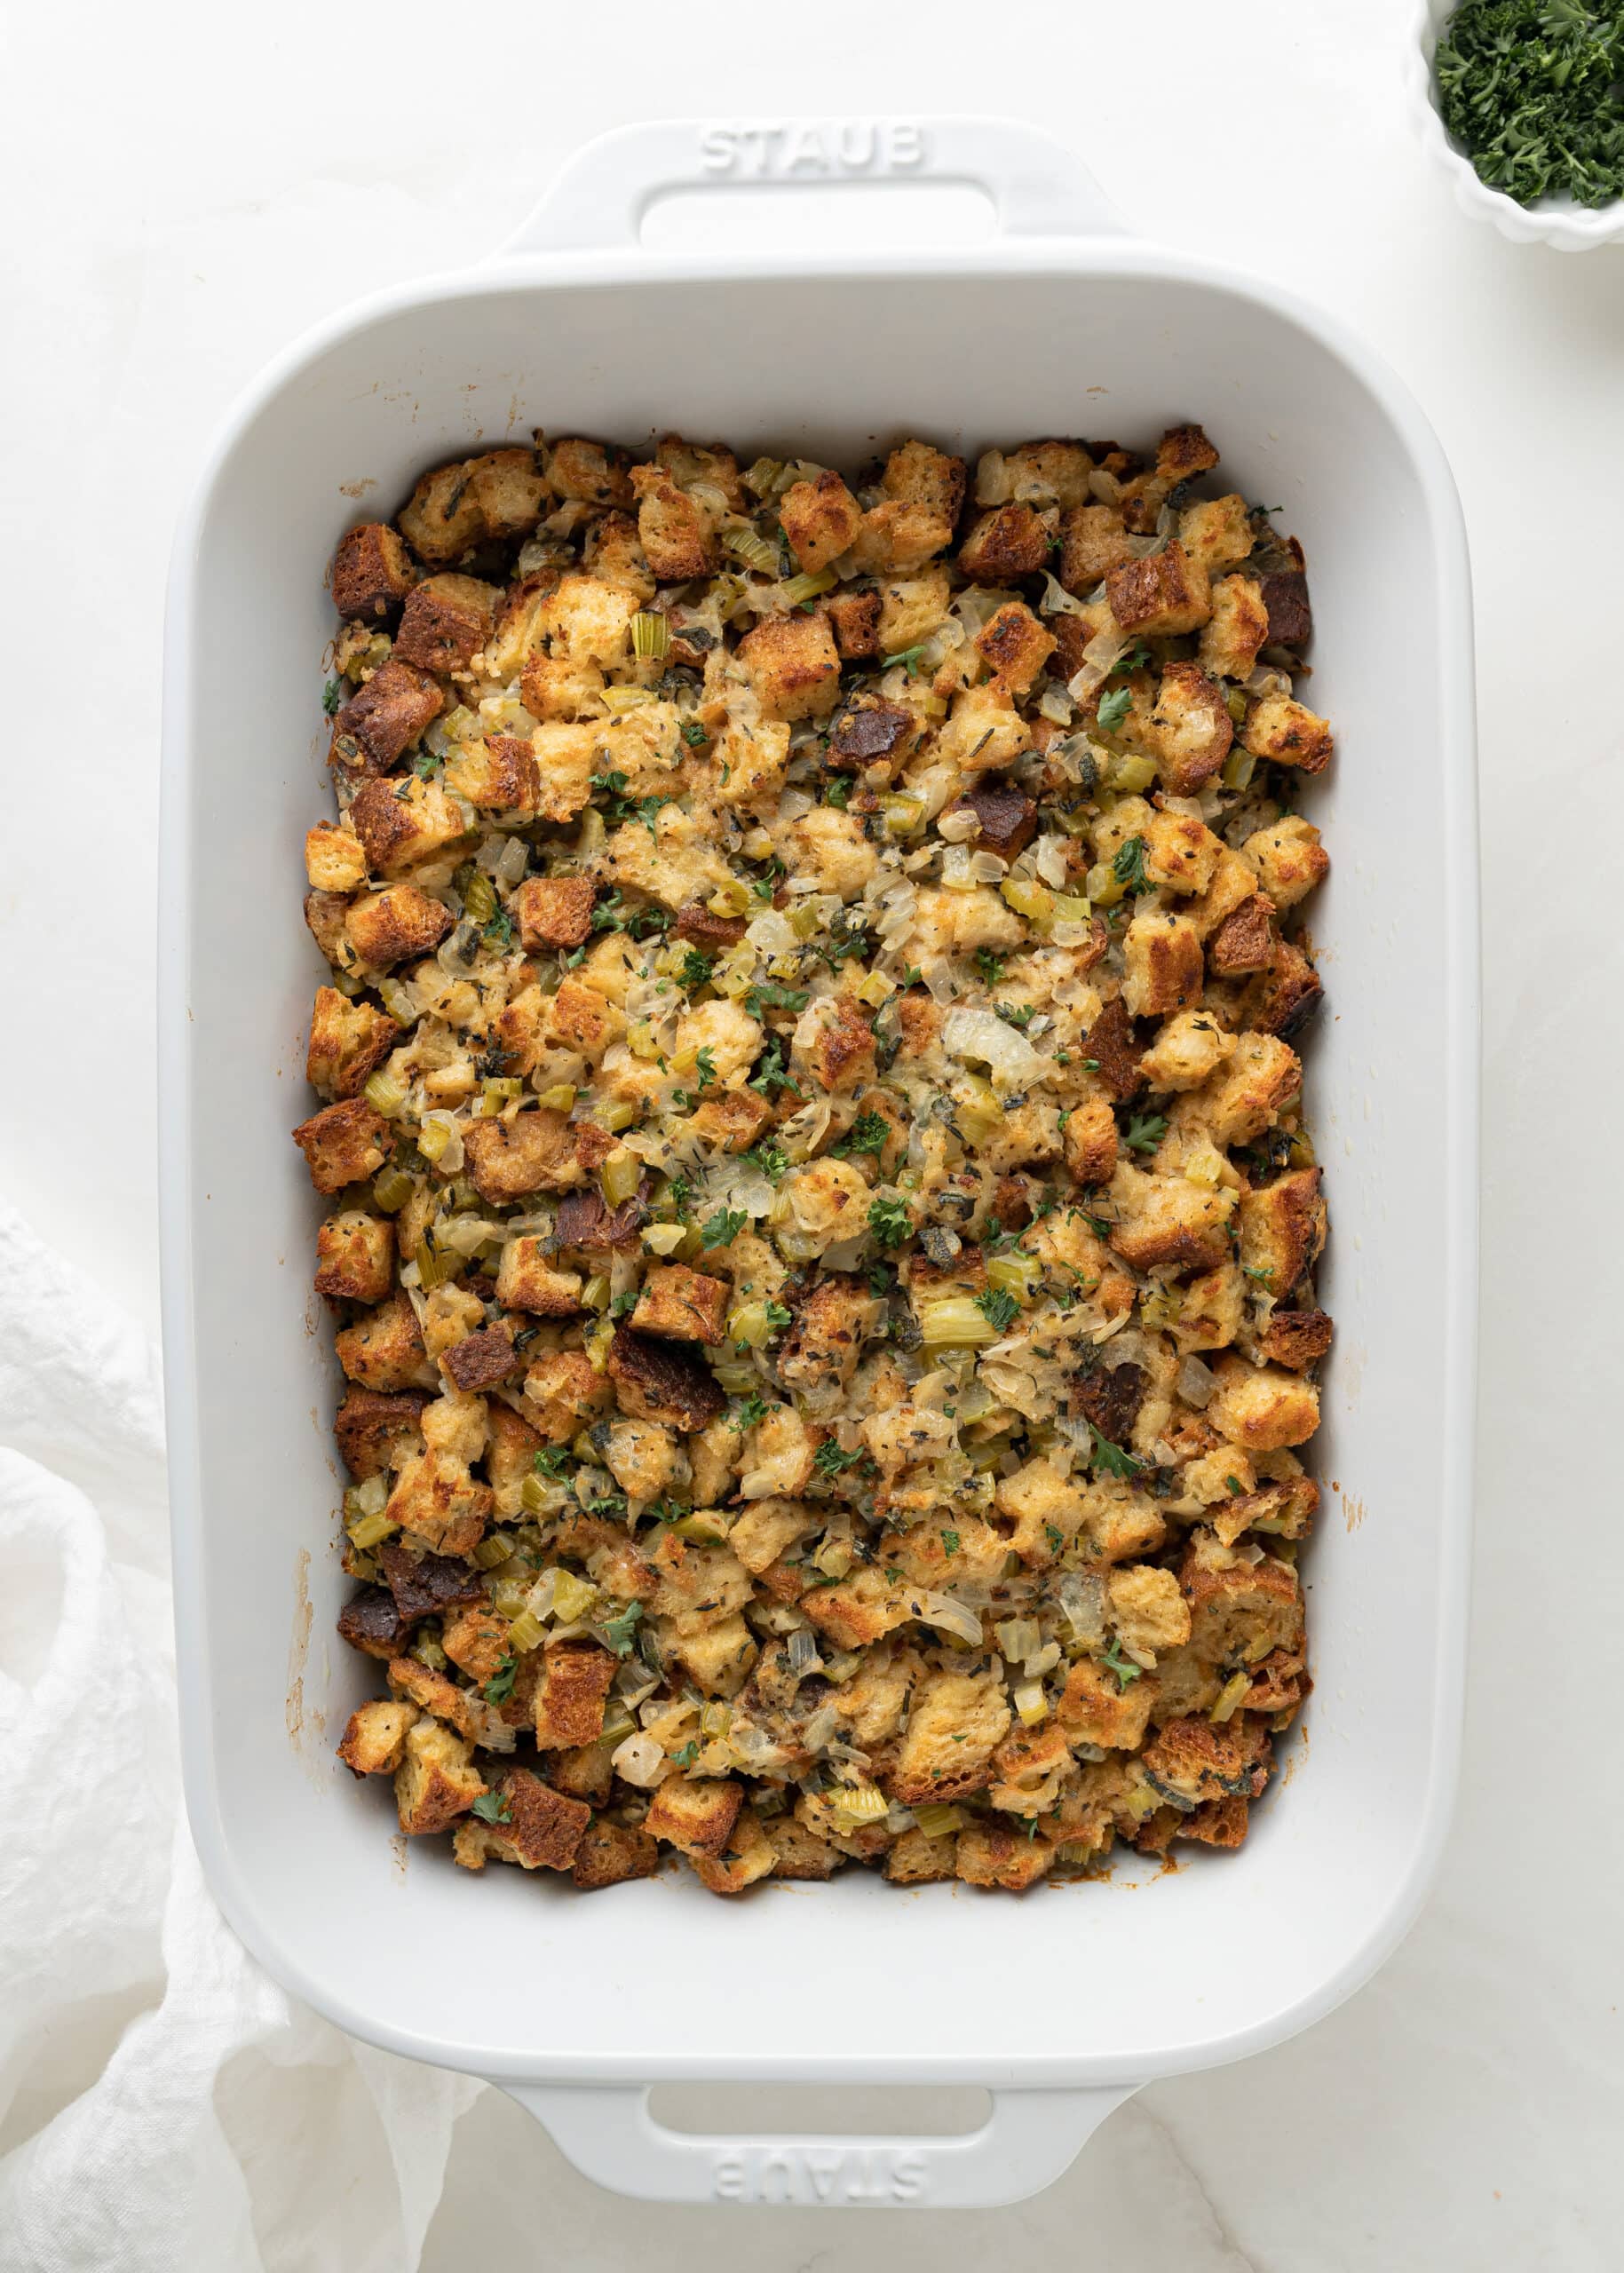 A large white ceramic baking dish with fully baked gluten-free stuffing.